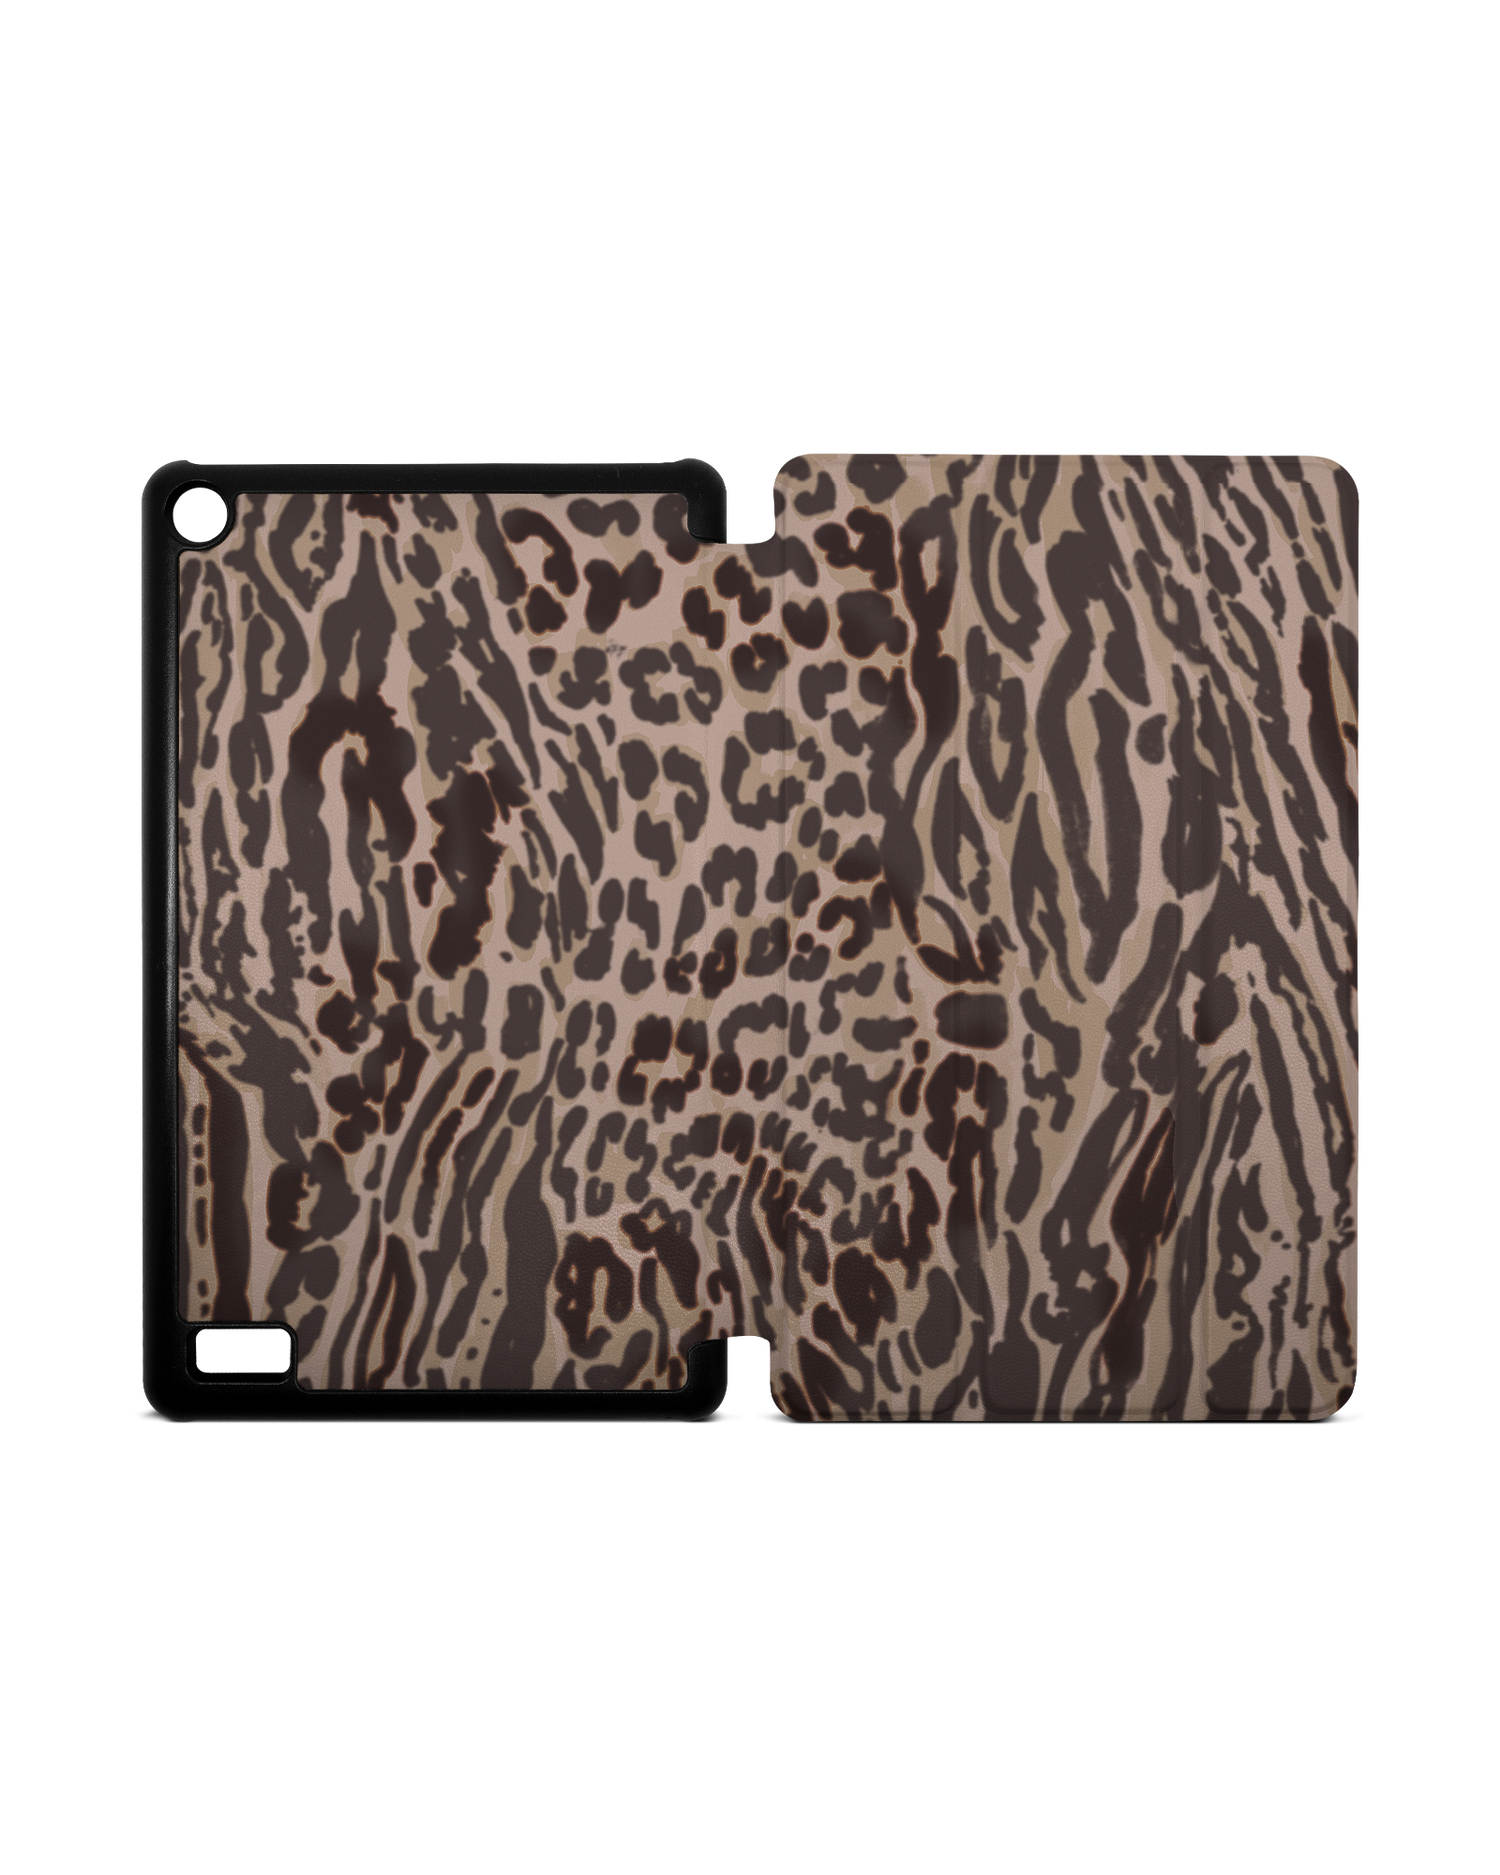 Animal Skin Tough Love Tablet Smart Case for Amazon Fire 7: Opened